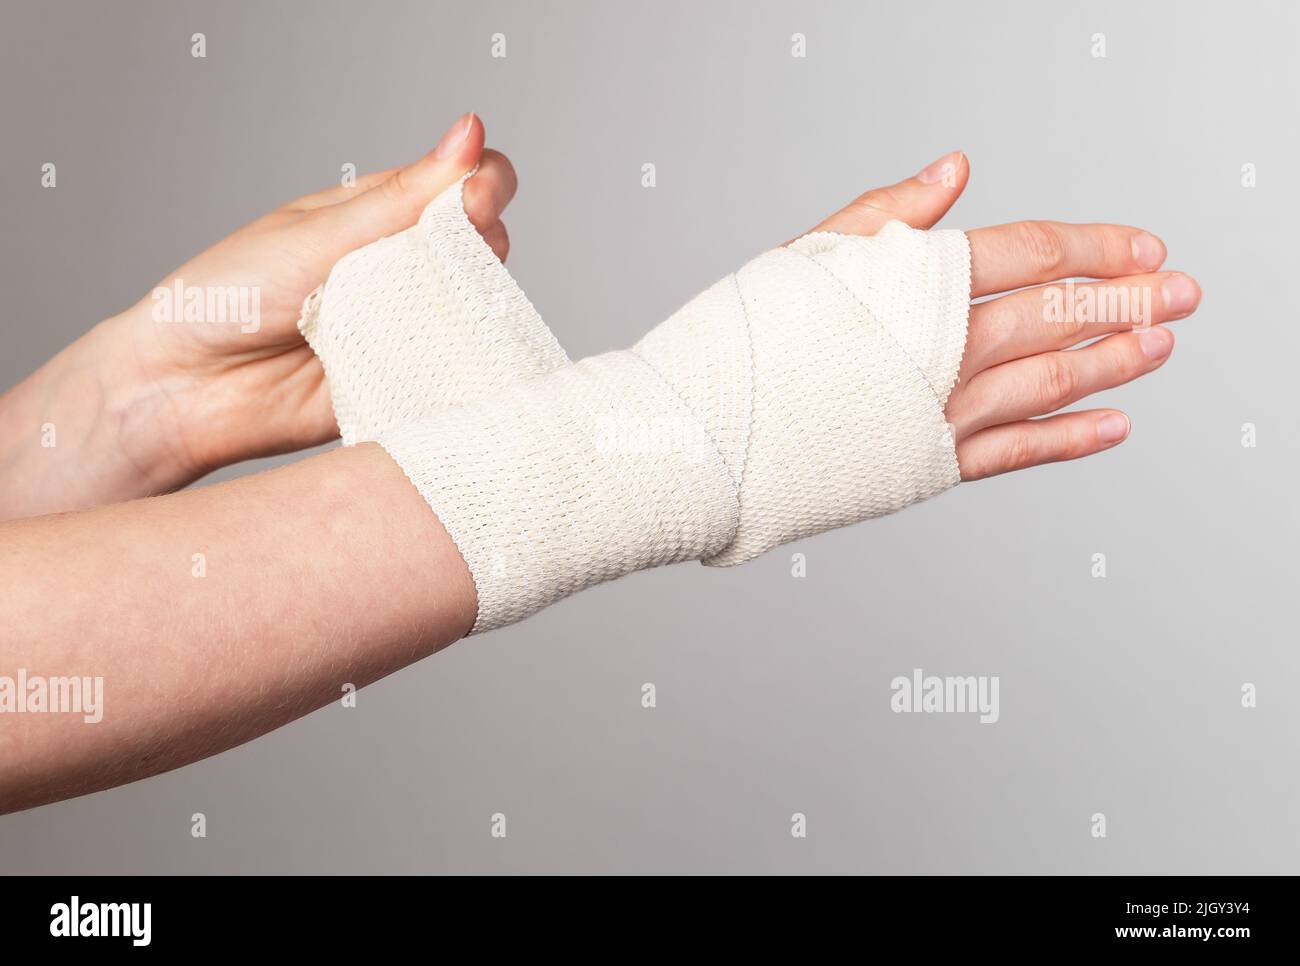 How and When to Wrap Your Hand After Injuring It - AICA Orthopedics